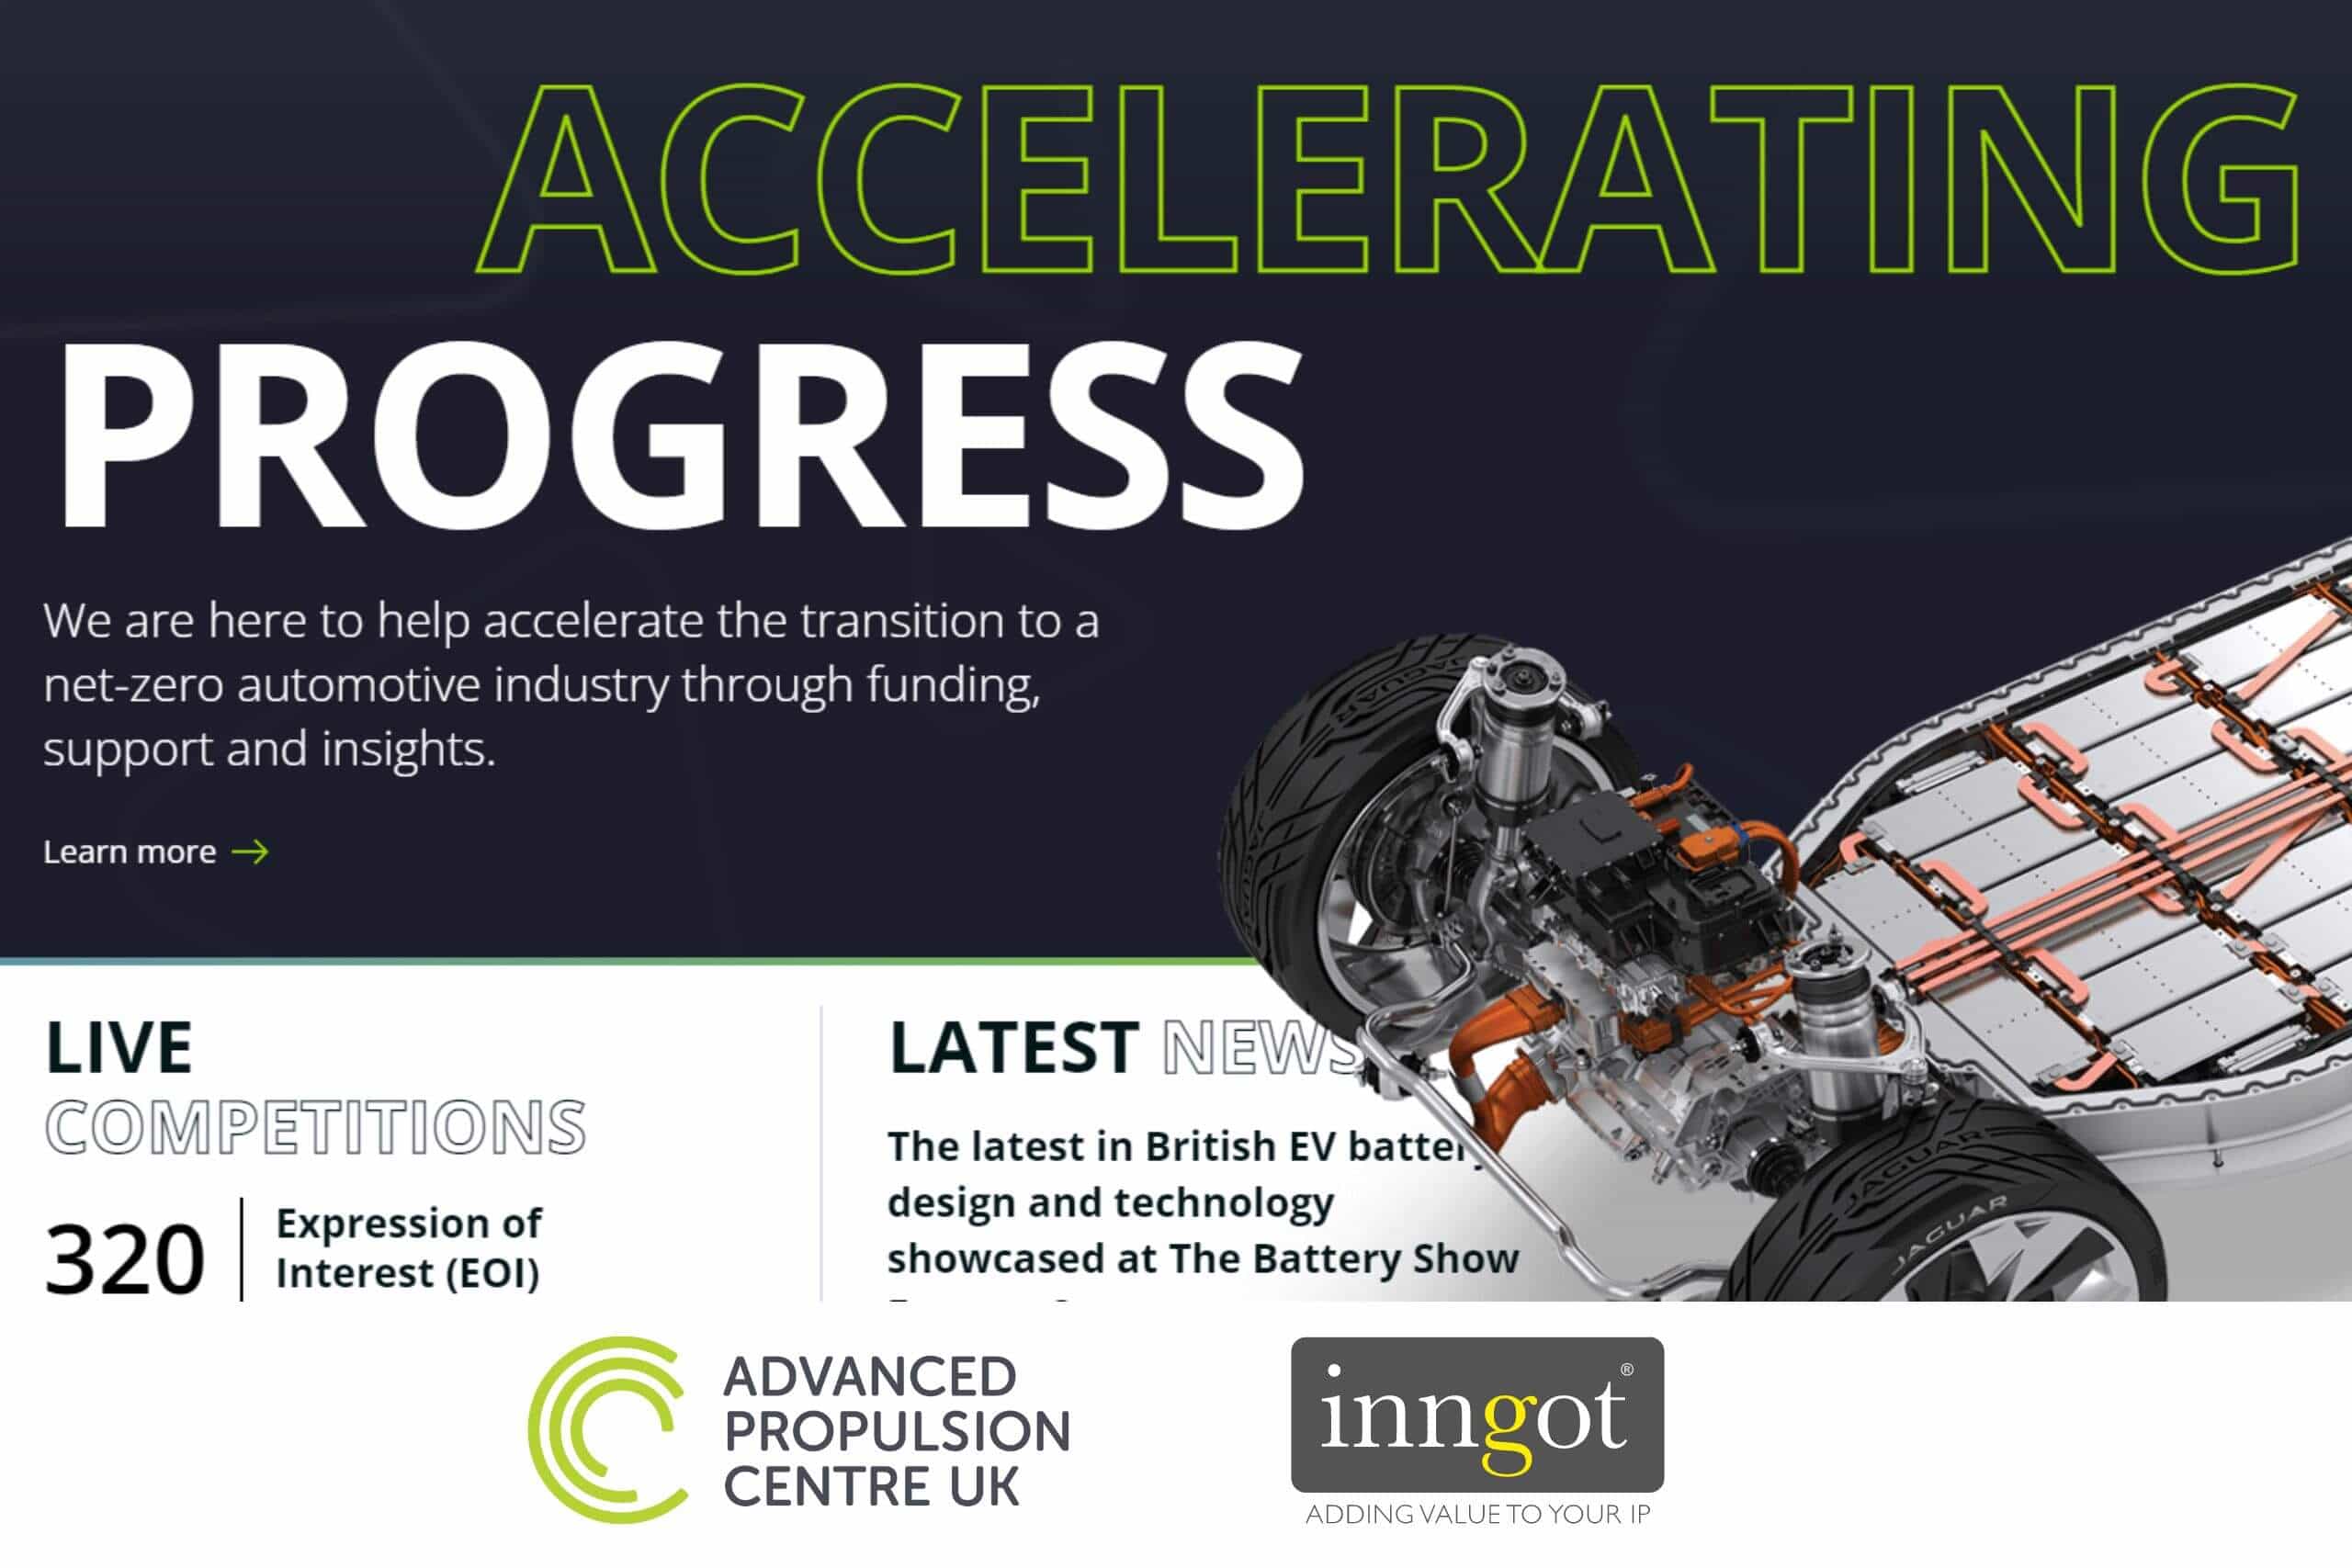 Blog post - Inngot proud to be partnering with TDAP wave 7 - £2.5 million program to accelerate small automotive businesses